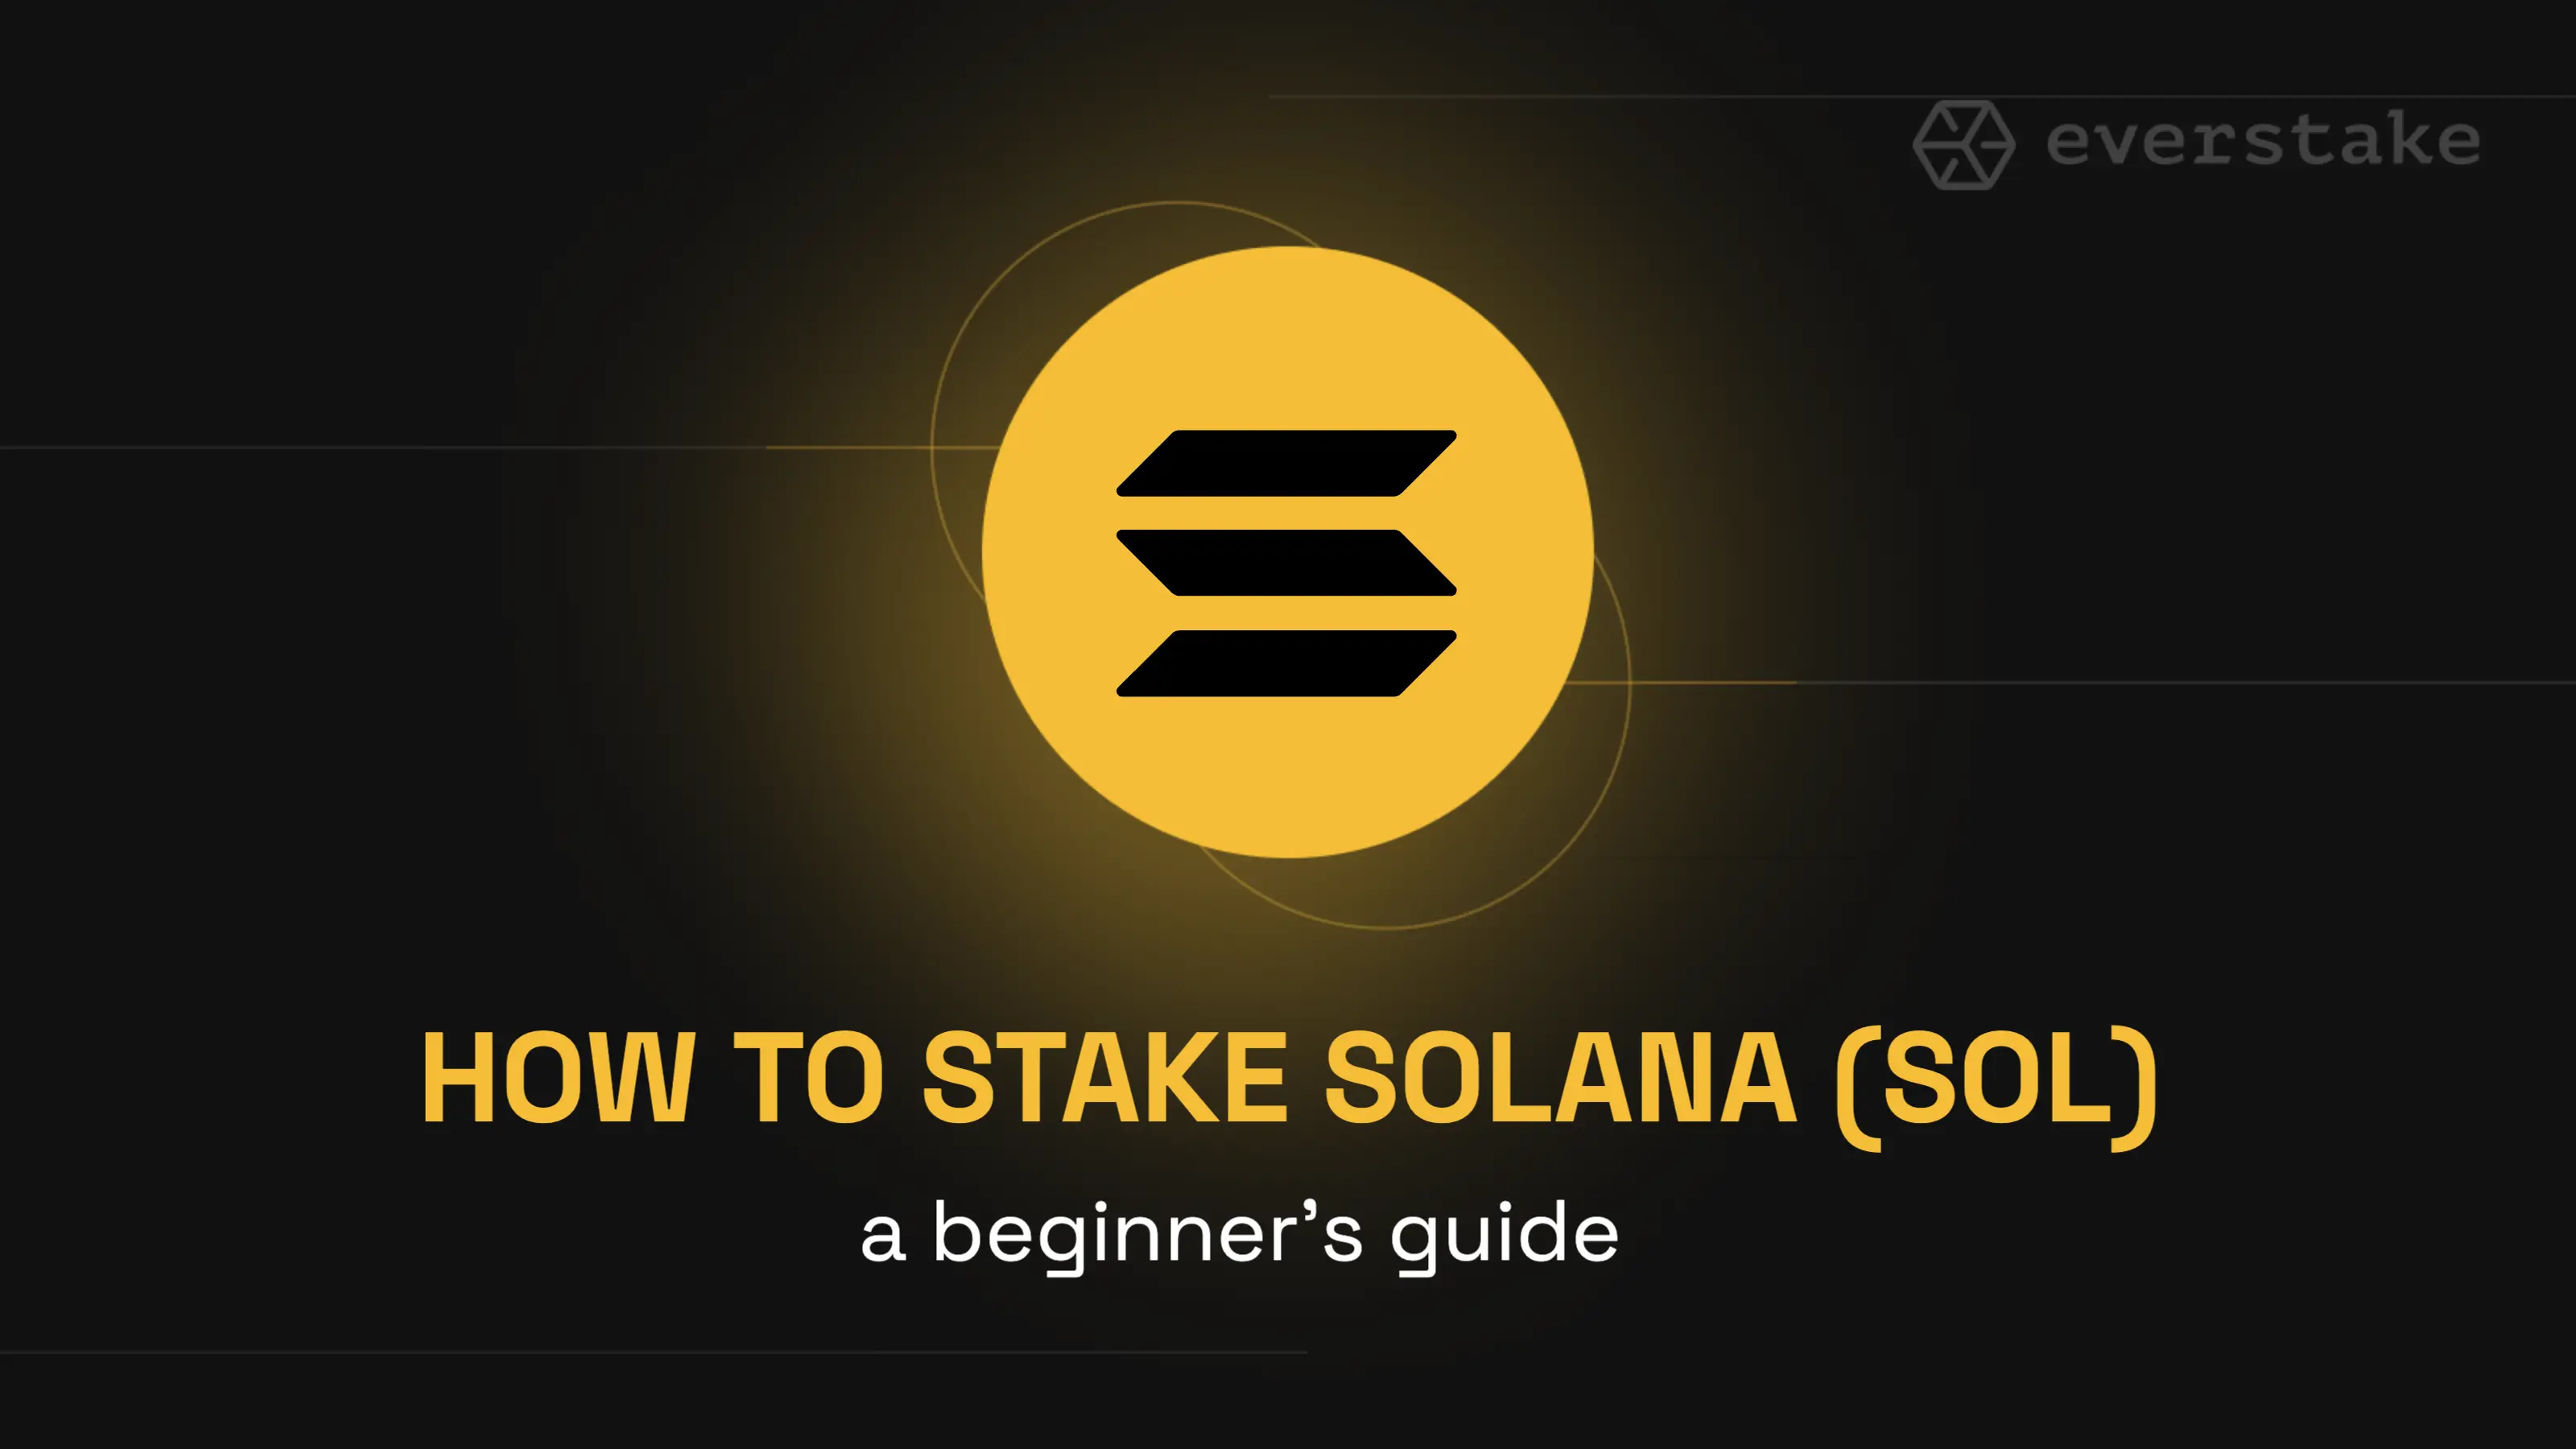 How to Stake Solana SOL: a Beginner's Guide